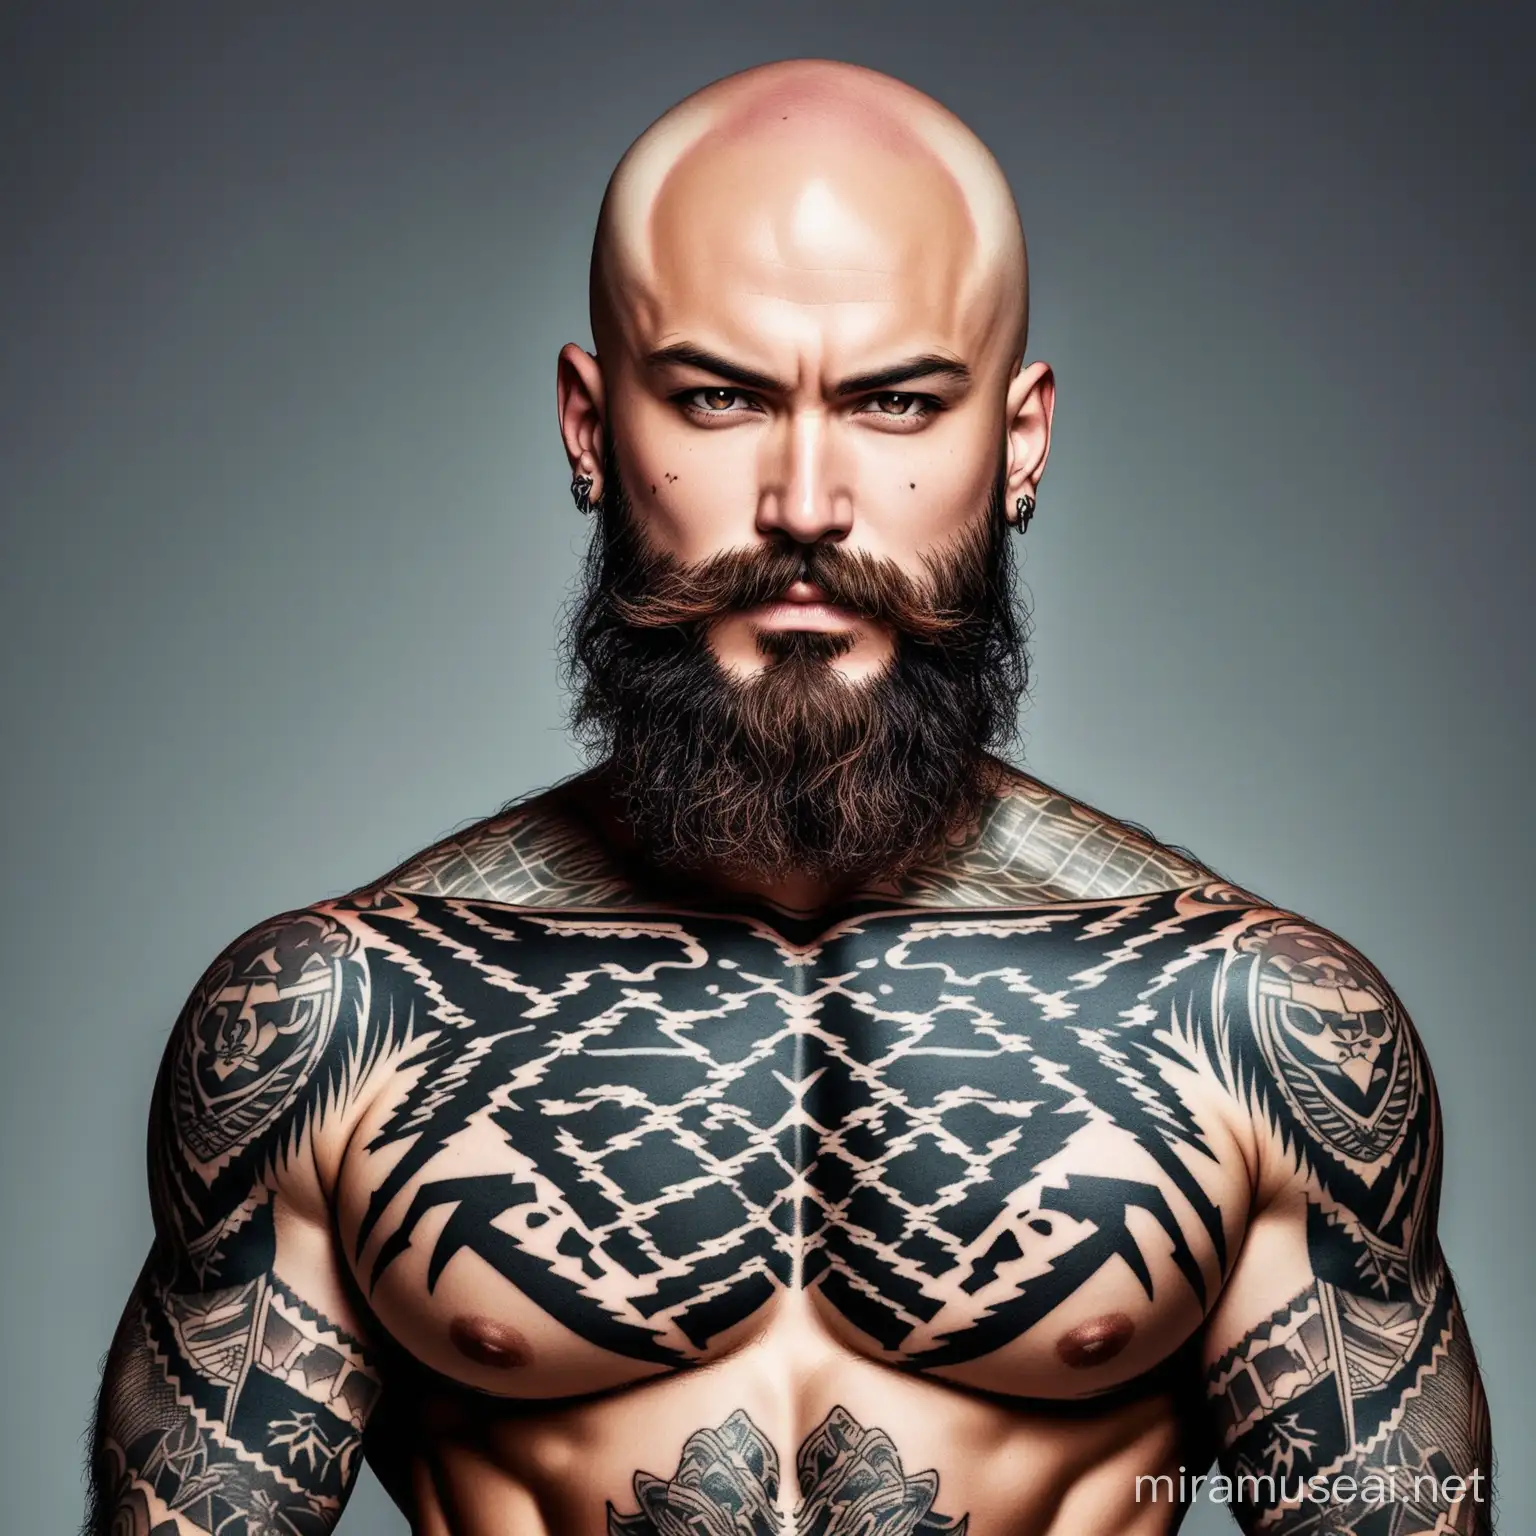 Tattooed Bald Man with Messy Beard Unique Masculine Appearance